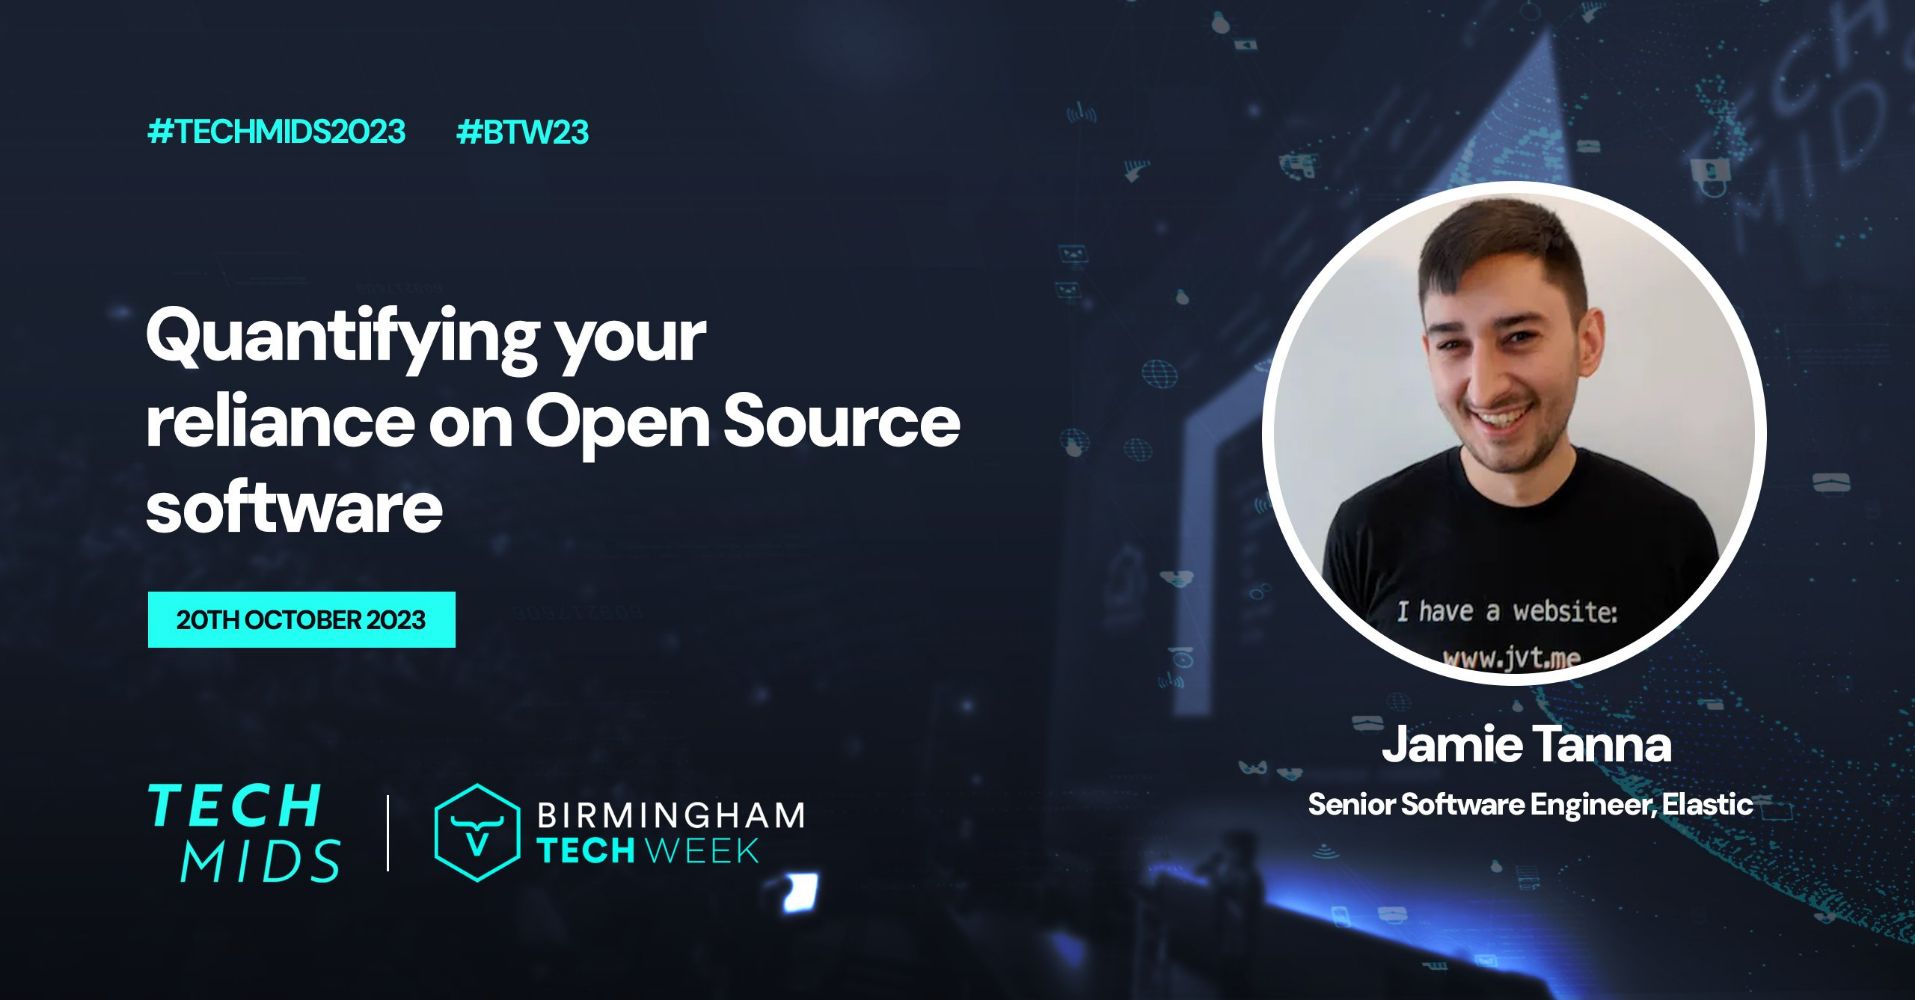 Promotional banner for TechMids conference showing my talk title "Quantifying your reliance on Open Source software" next to my headshot, name and job title. Behind the text, you can see the outline of a speaker on stage at the last event